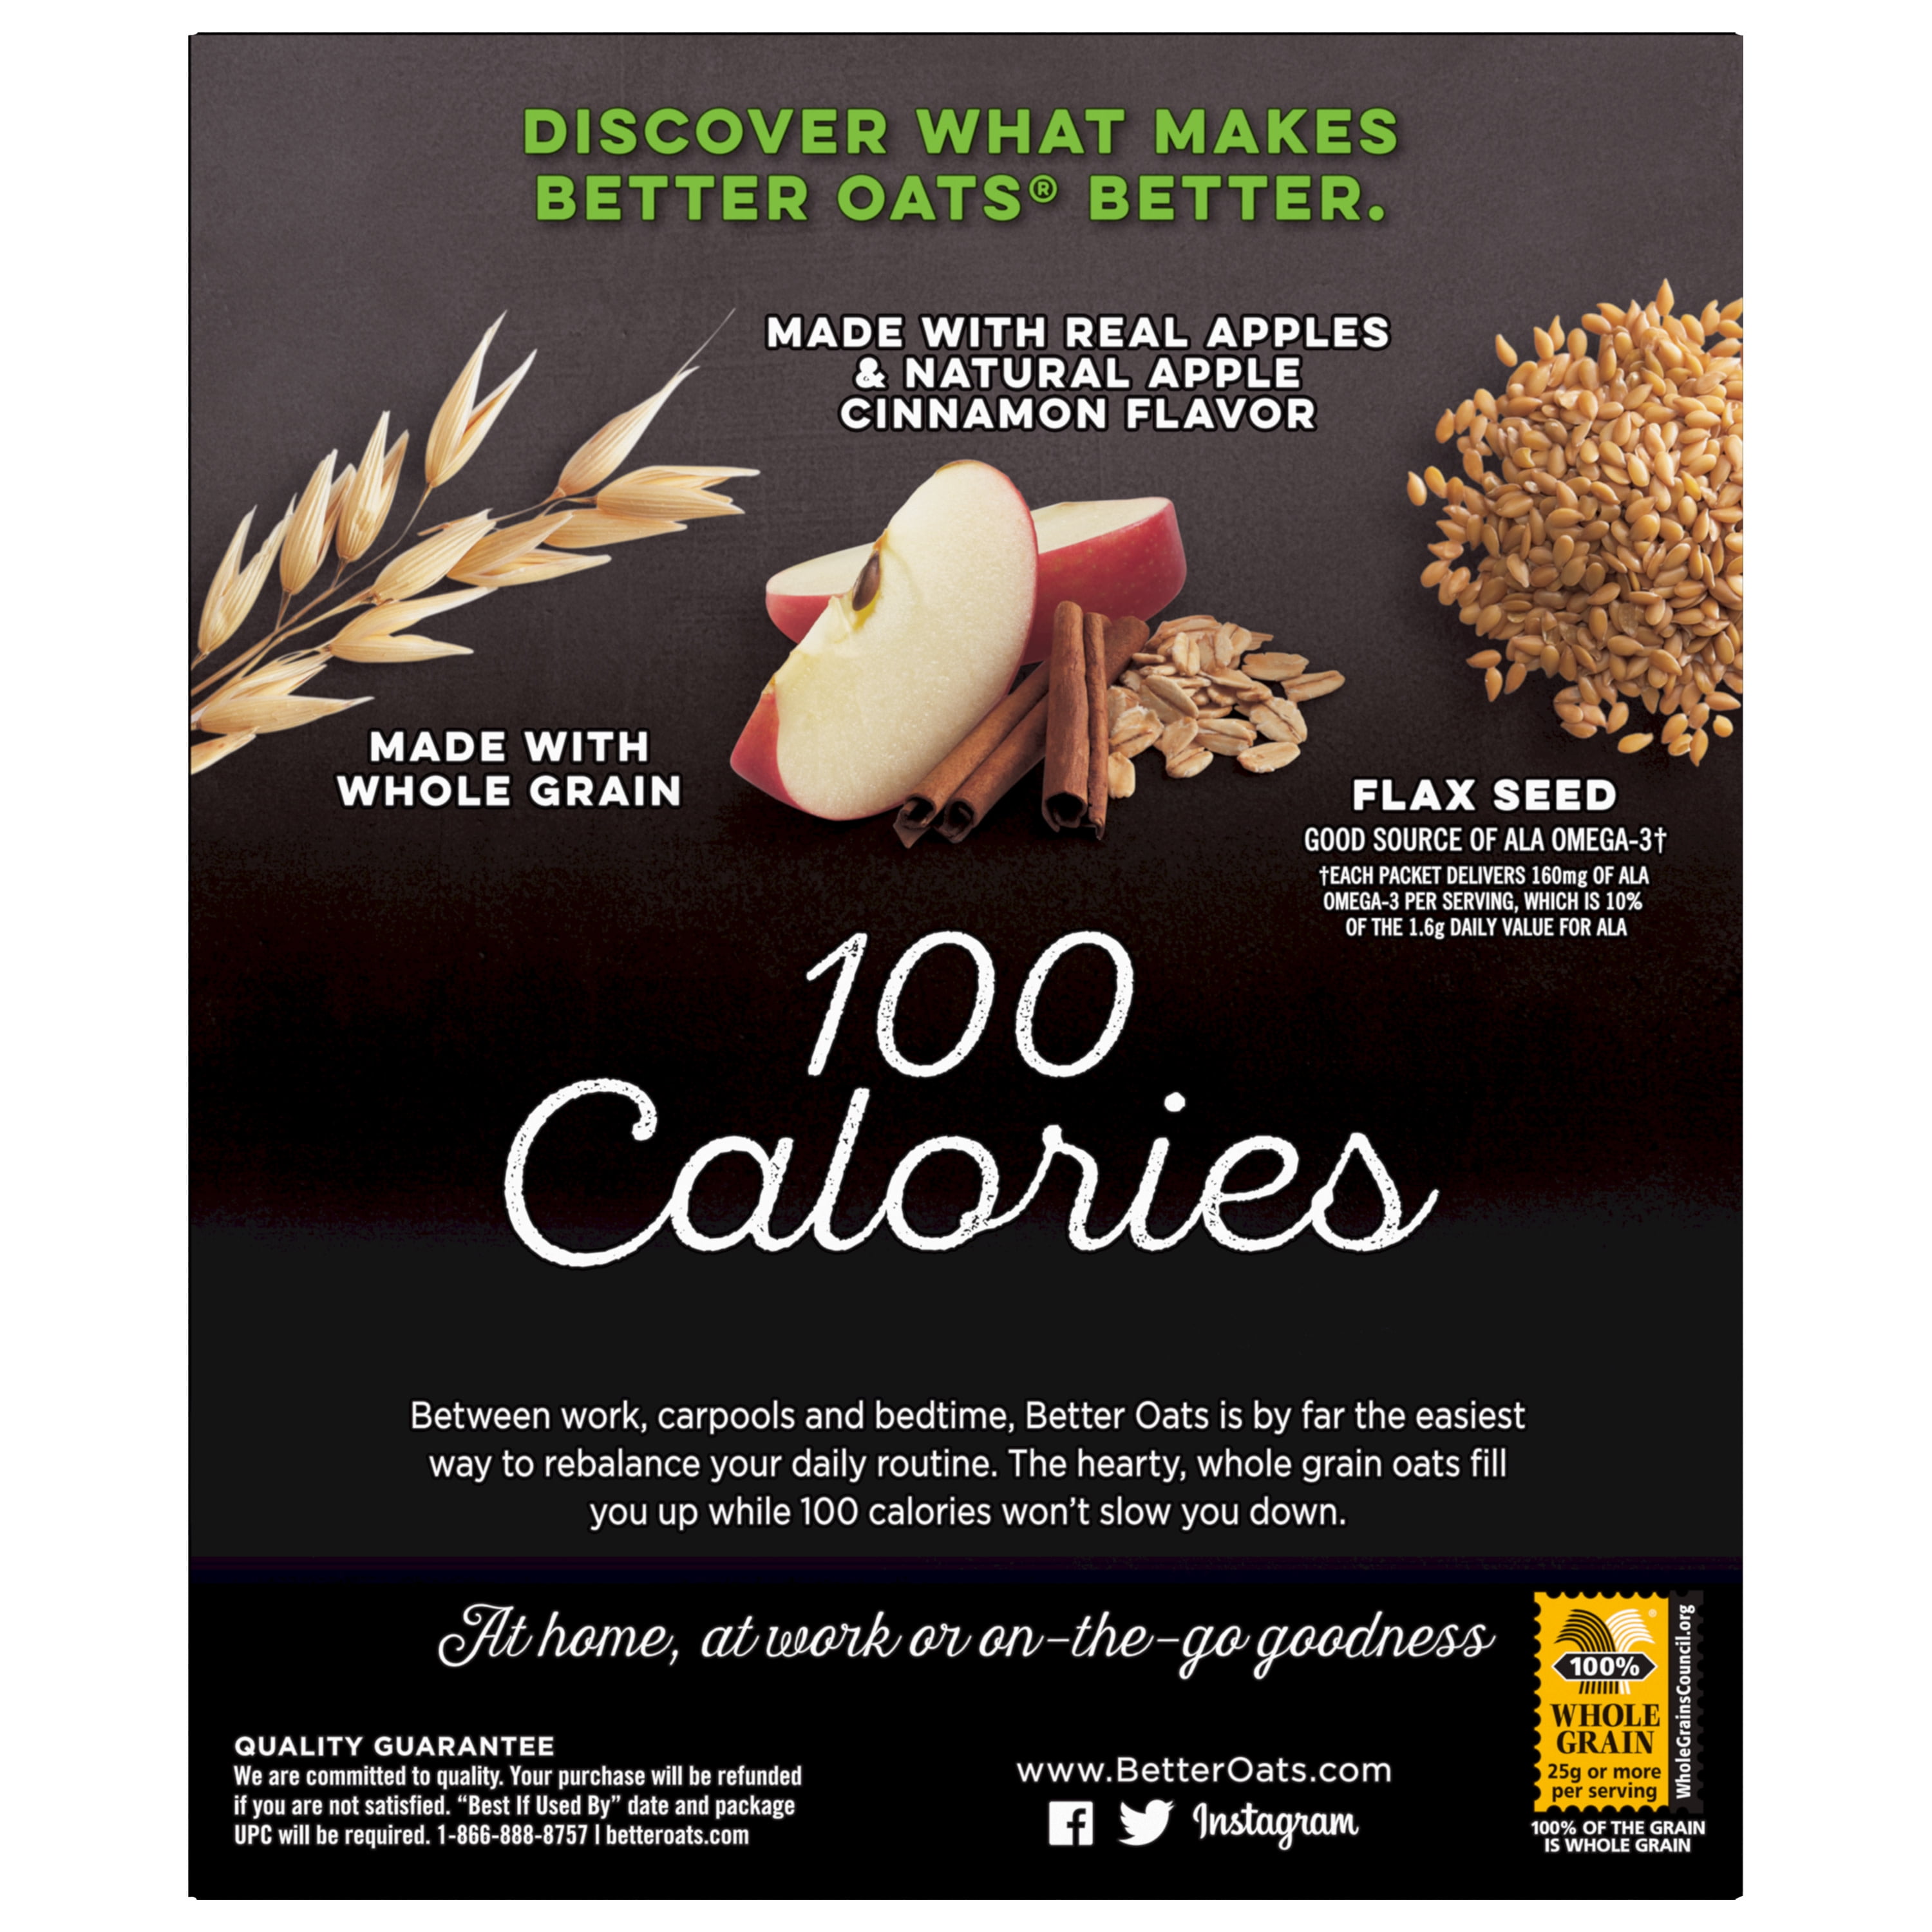 Better Oats® Oat Revolution!® Steel Cut Apples & Cinnamon Instant Oatmeal  with Flax 10 ct Box 